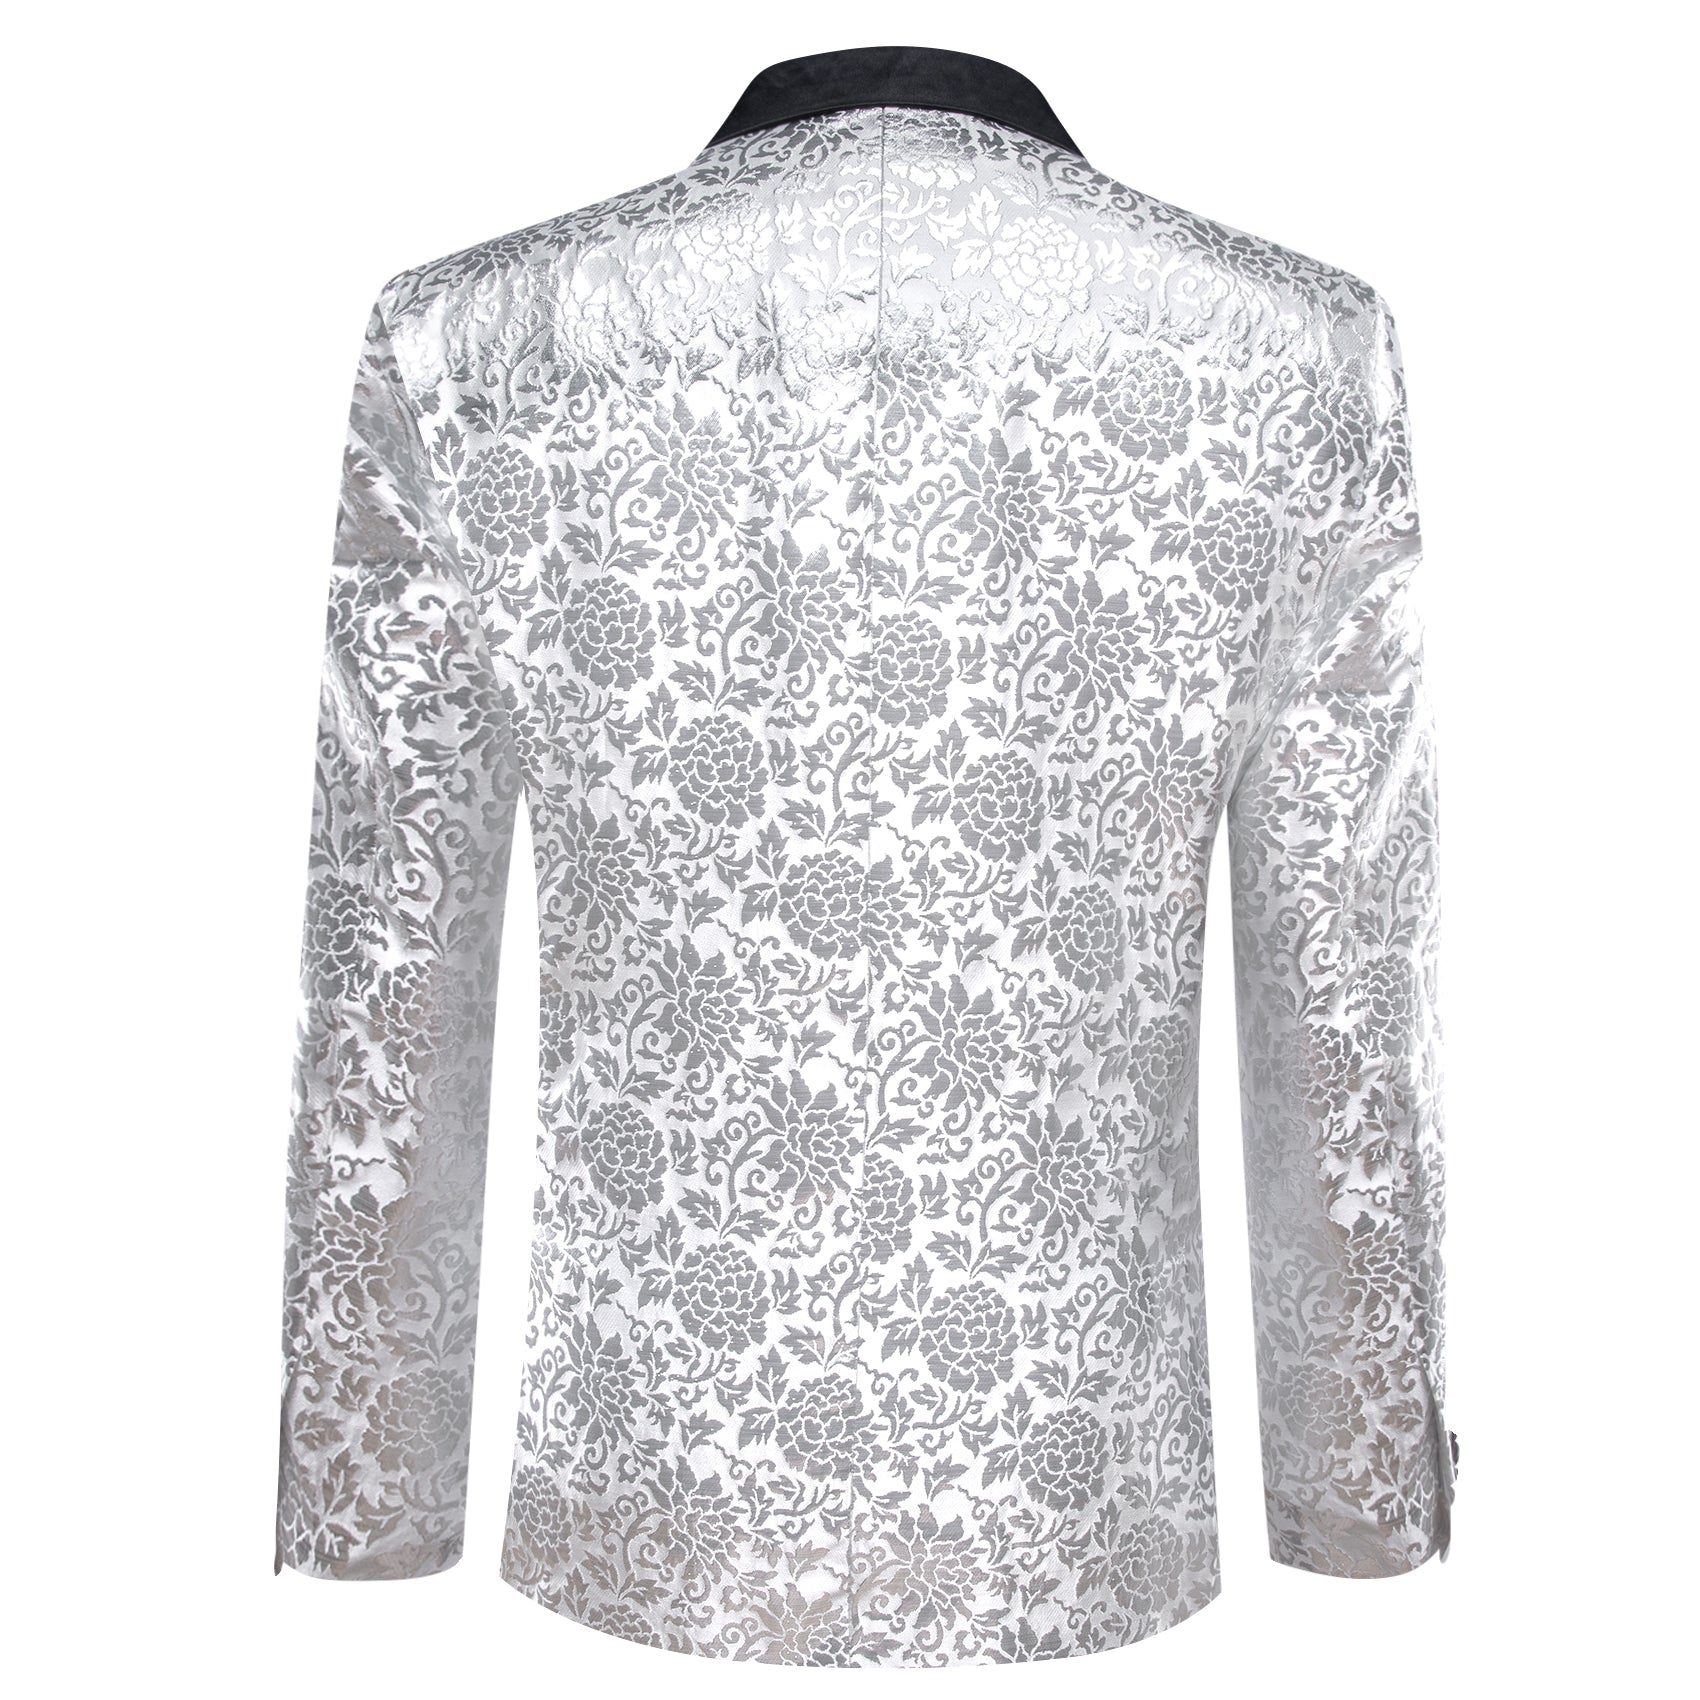 Barry.wang  Men's Shirt White Floral Notched Collar Suit Jacket